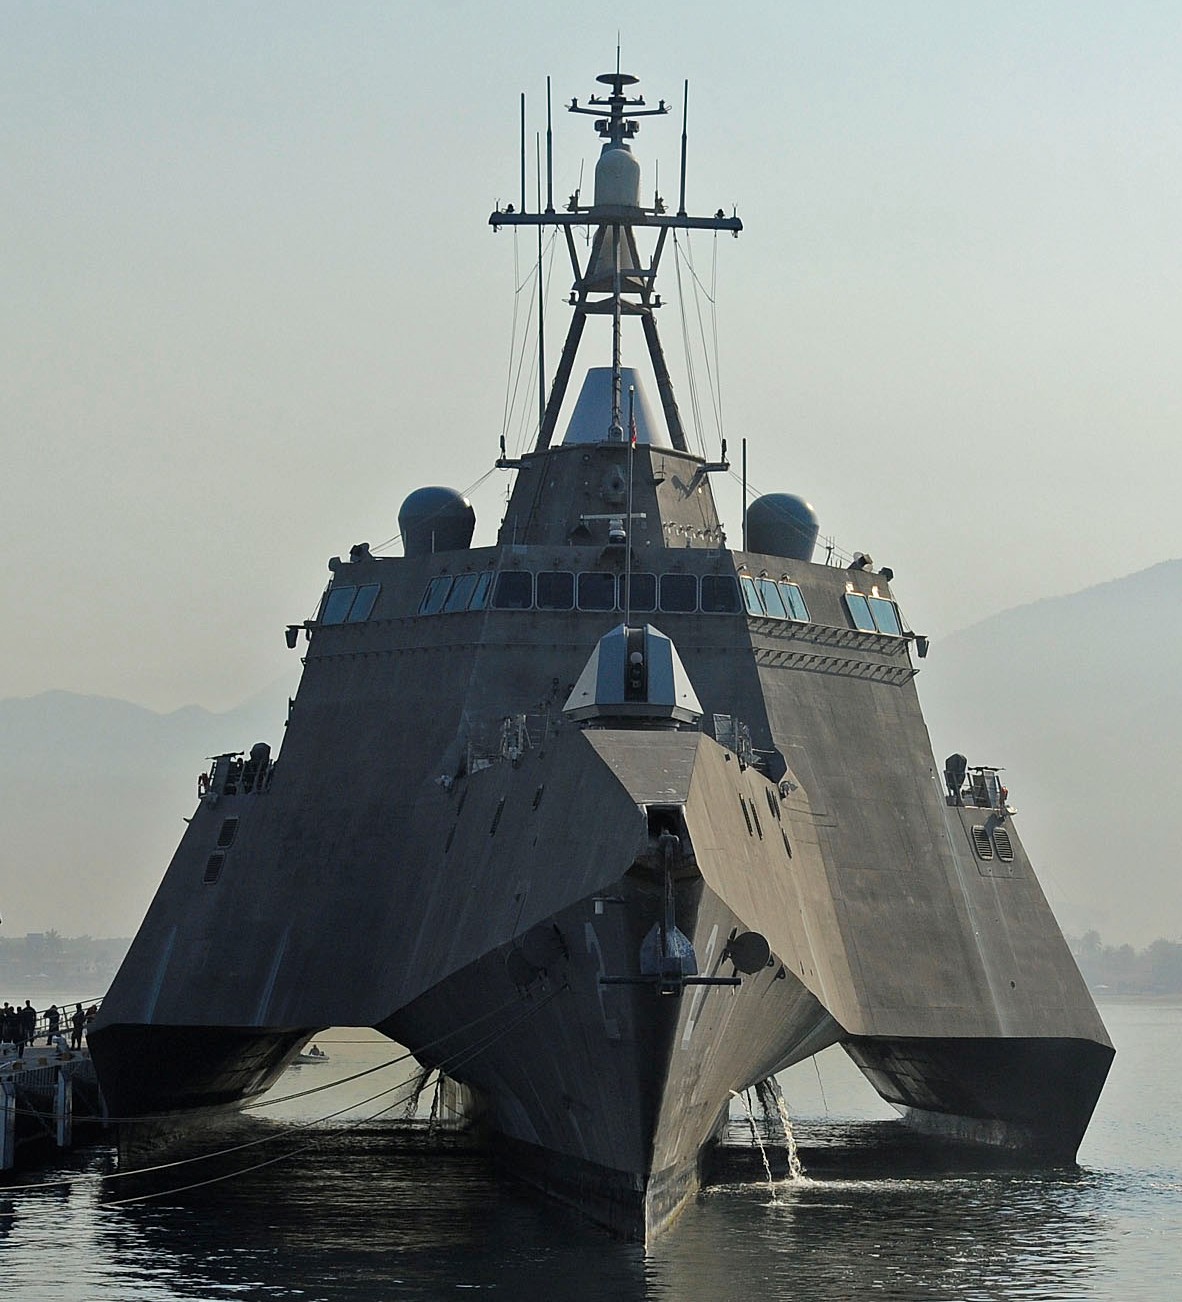 lcs-2 uss independence littoral combat ship us navy class 40a